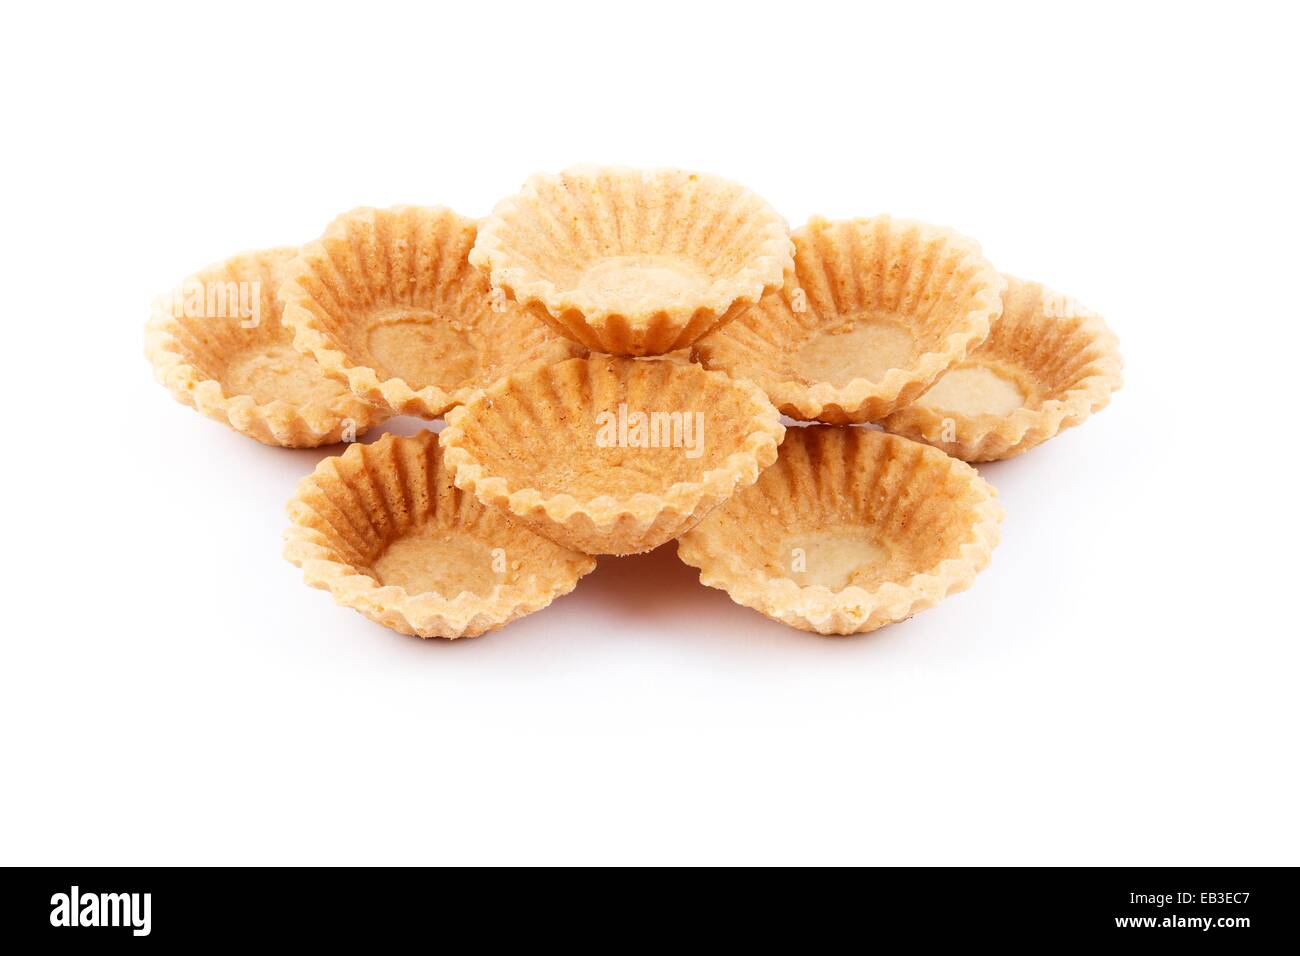 Homemade cookies on a white background Stock Photo